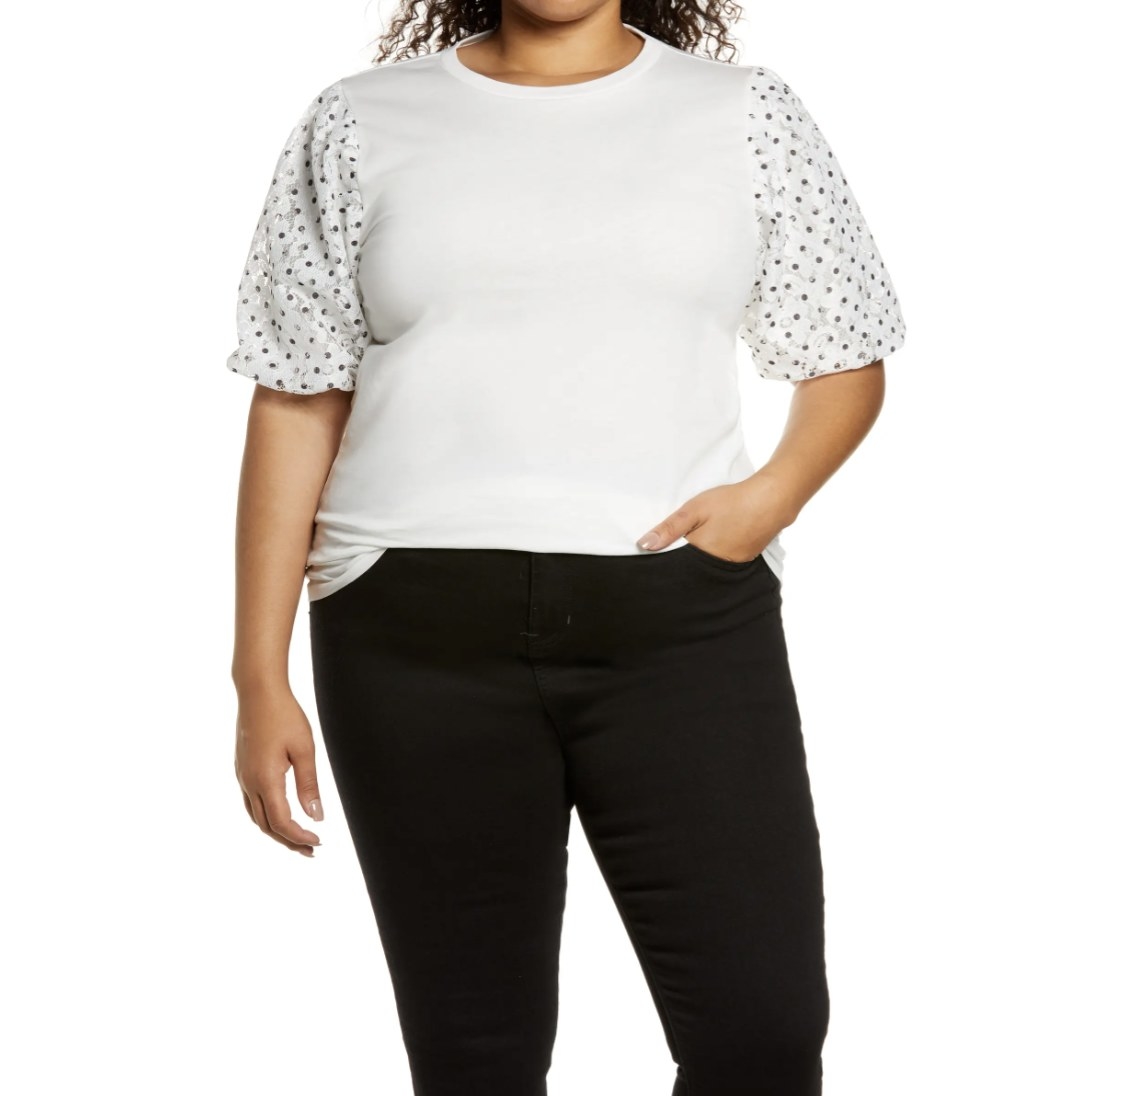 Model is wearing a white top with polka dot sleeves and black pants